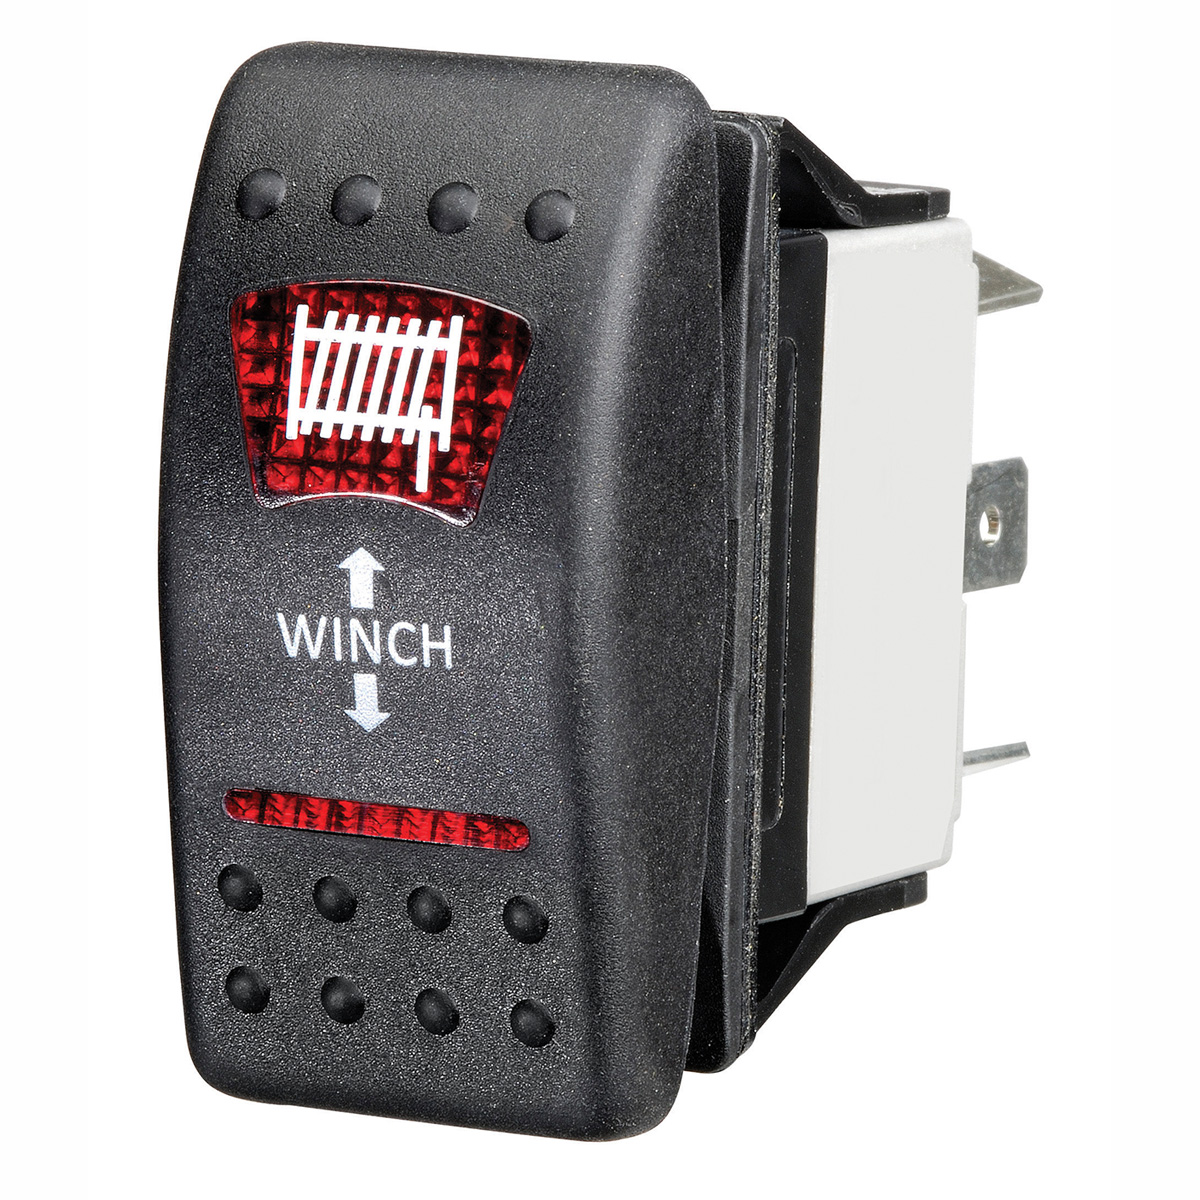 STARK 7-PIN Momentary Winch In Out Rocker Toggle Switch Waterproof Black Shell/ON-OFF-ON DPDT illuminated Rocker Switch For Auto Truck Boat Marine Red DC 20A 12V/10A 24V WINCH IN WINCH OUT 